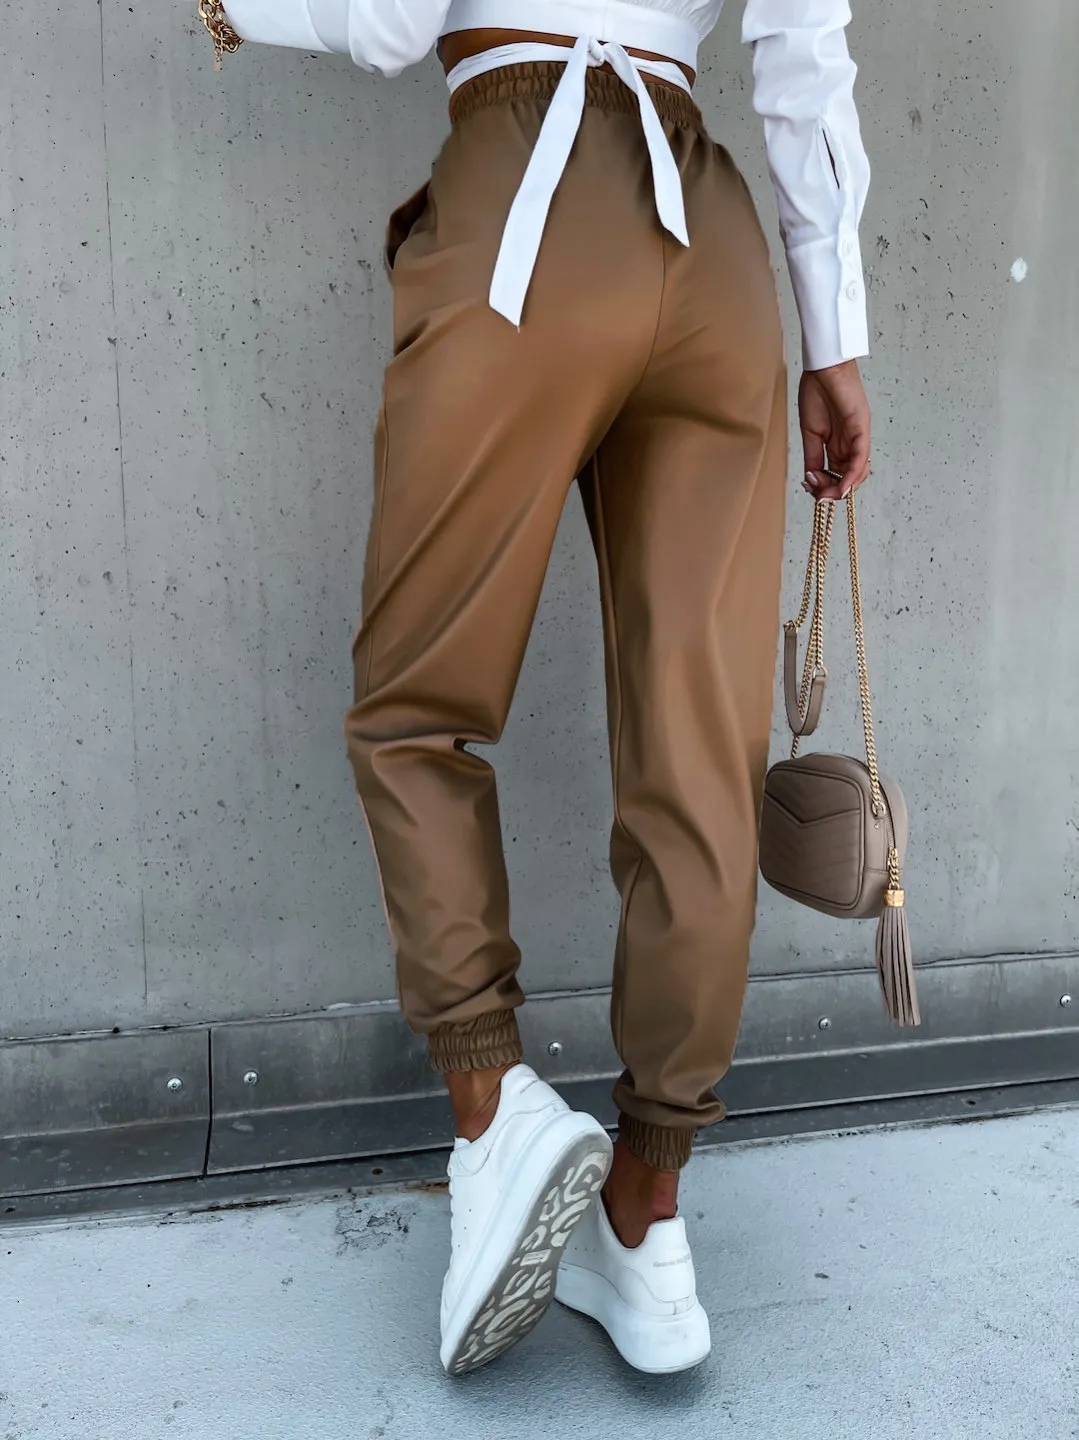 wsevypo PU Leather Sweatpants Fall Winter Fashion Casual High Elastic Waist Joggers Trousers Women Solid Color Harem Pants